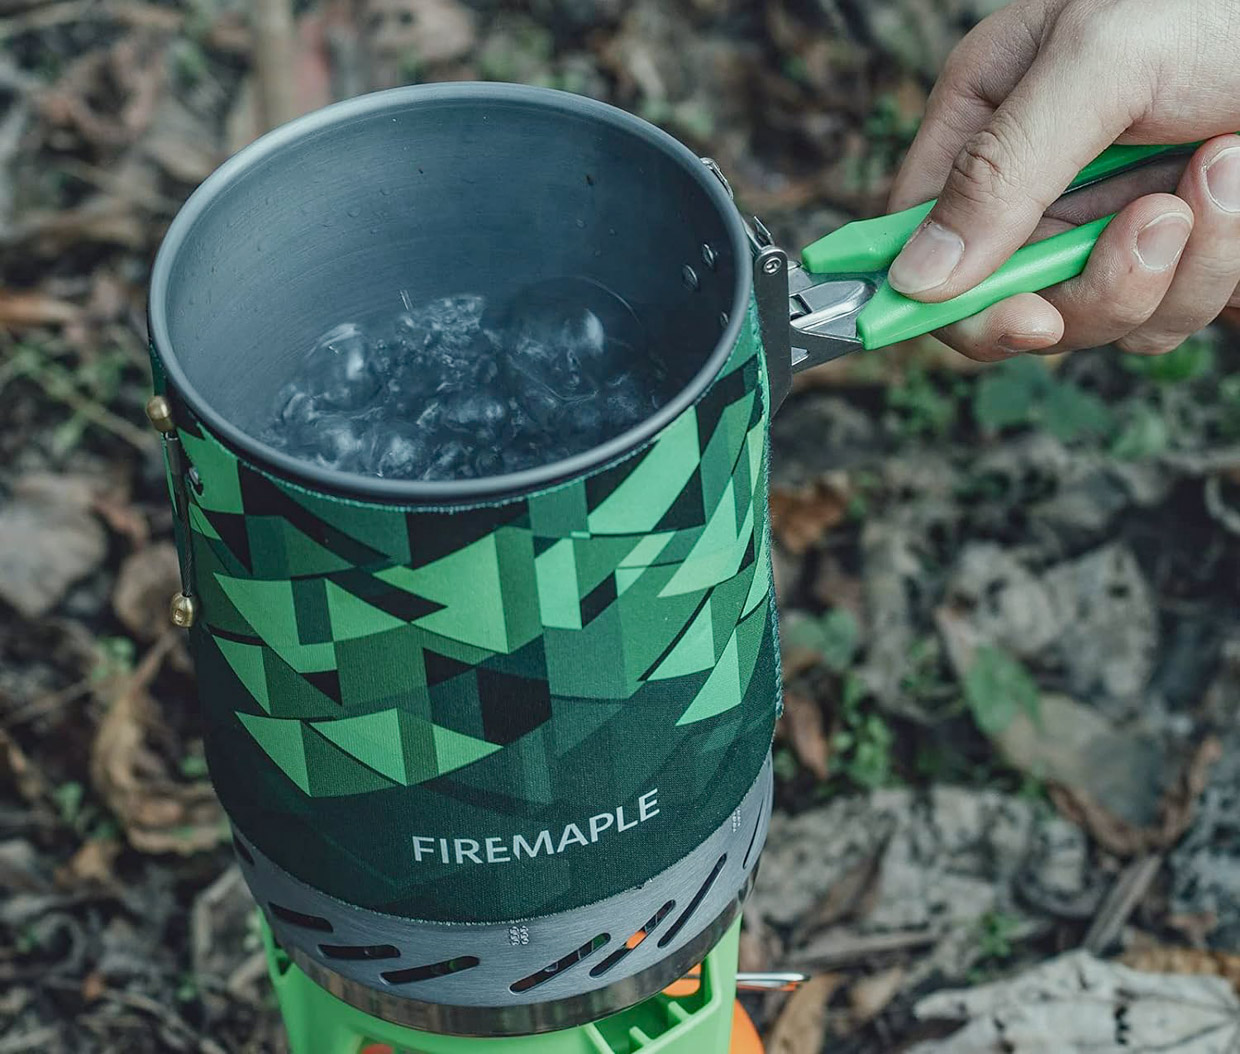 Fire-Maple Fixed Star X2 Camp Stove